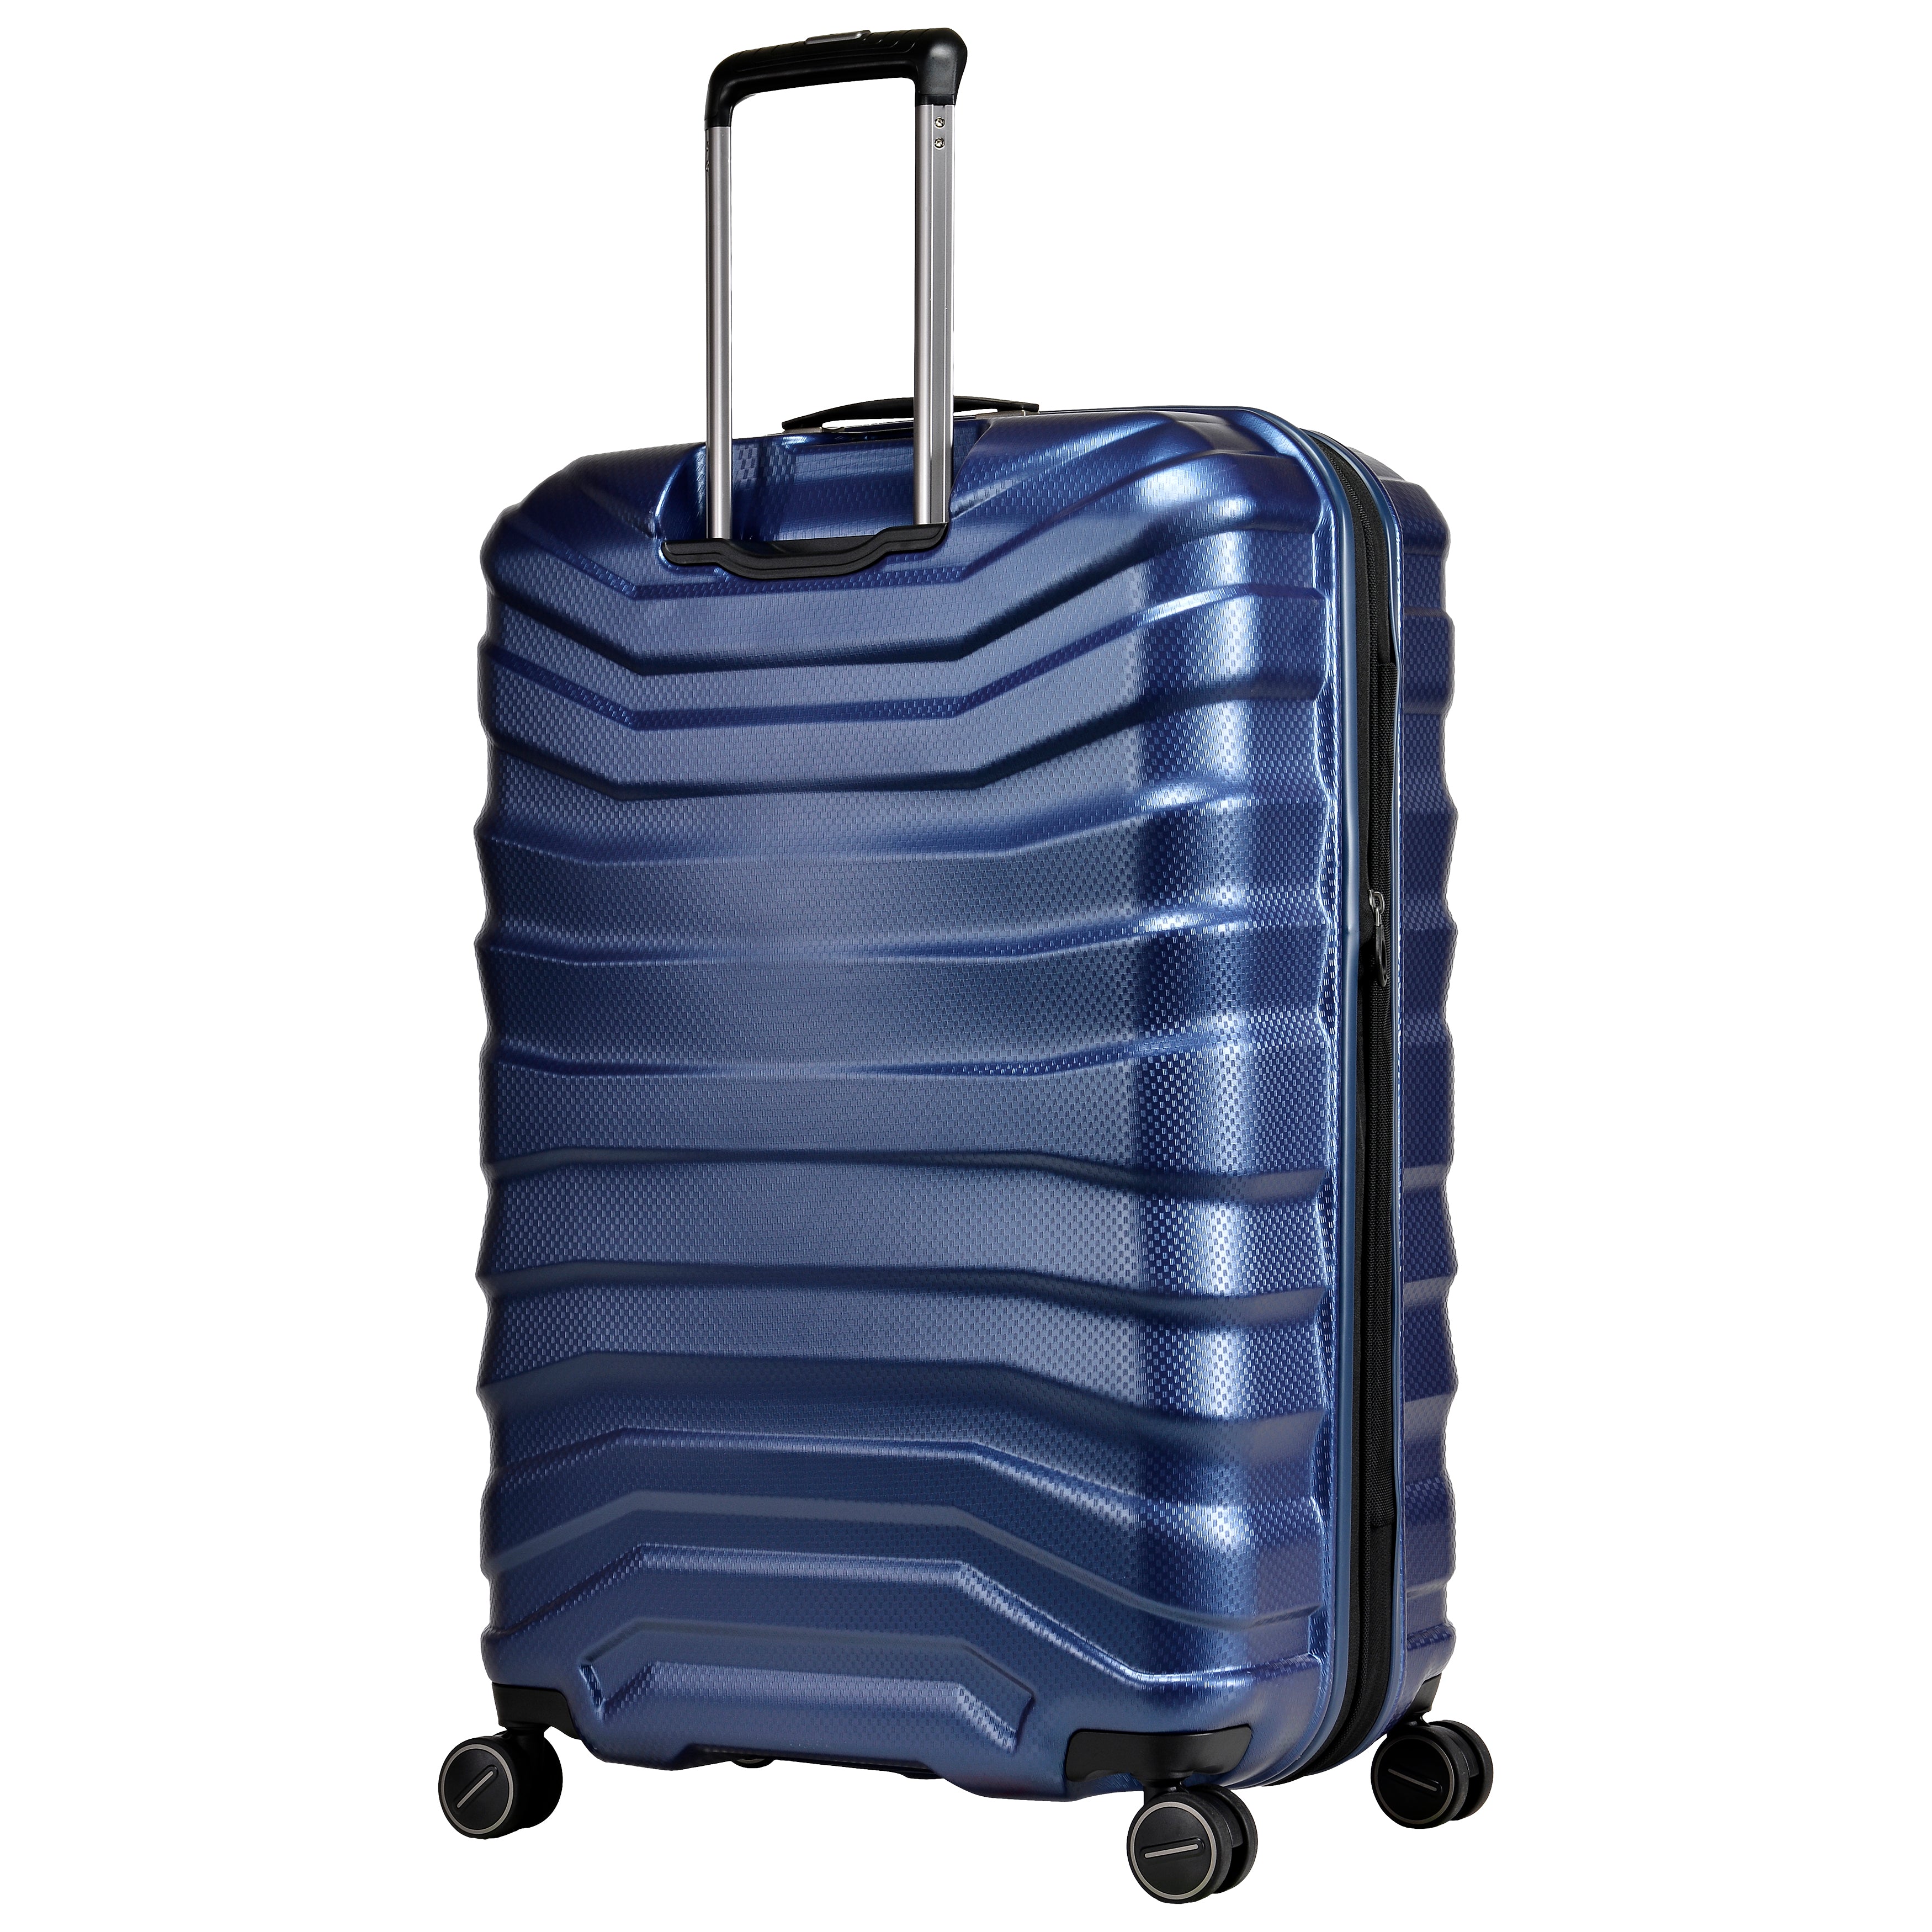 Eminent - KH93 28in Large TPO Suitcase - Blue